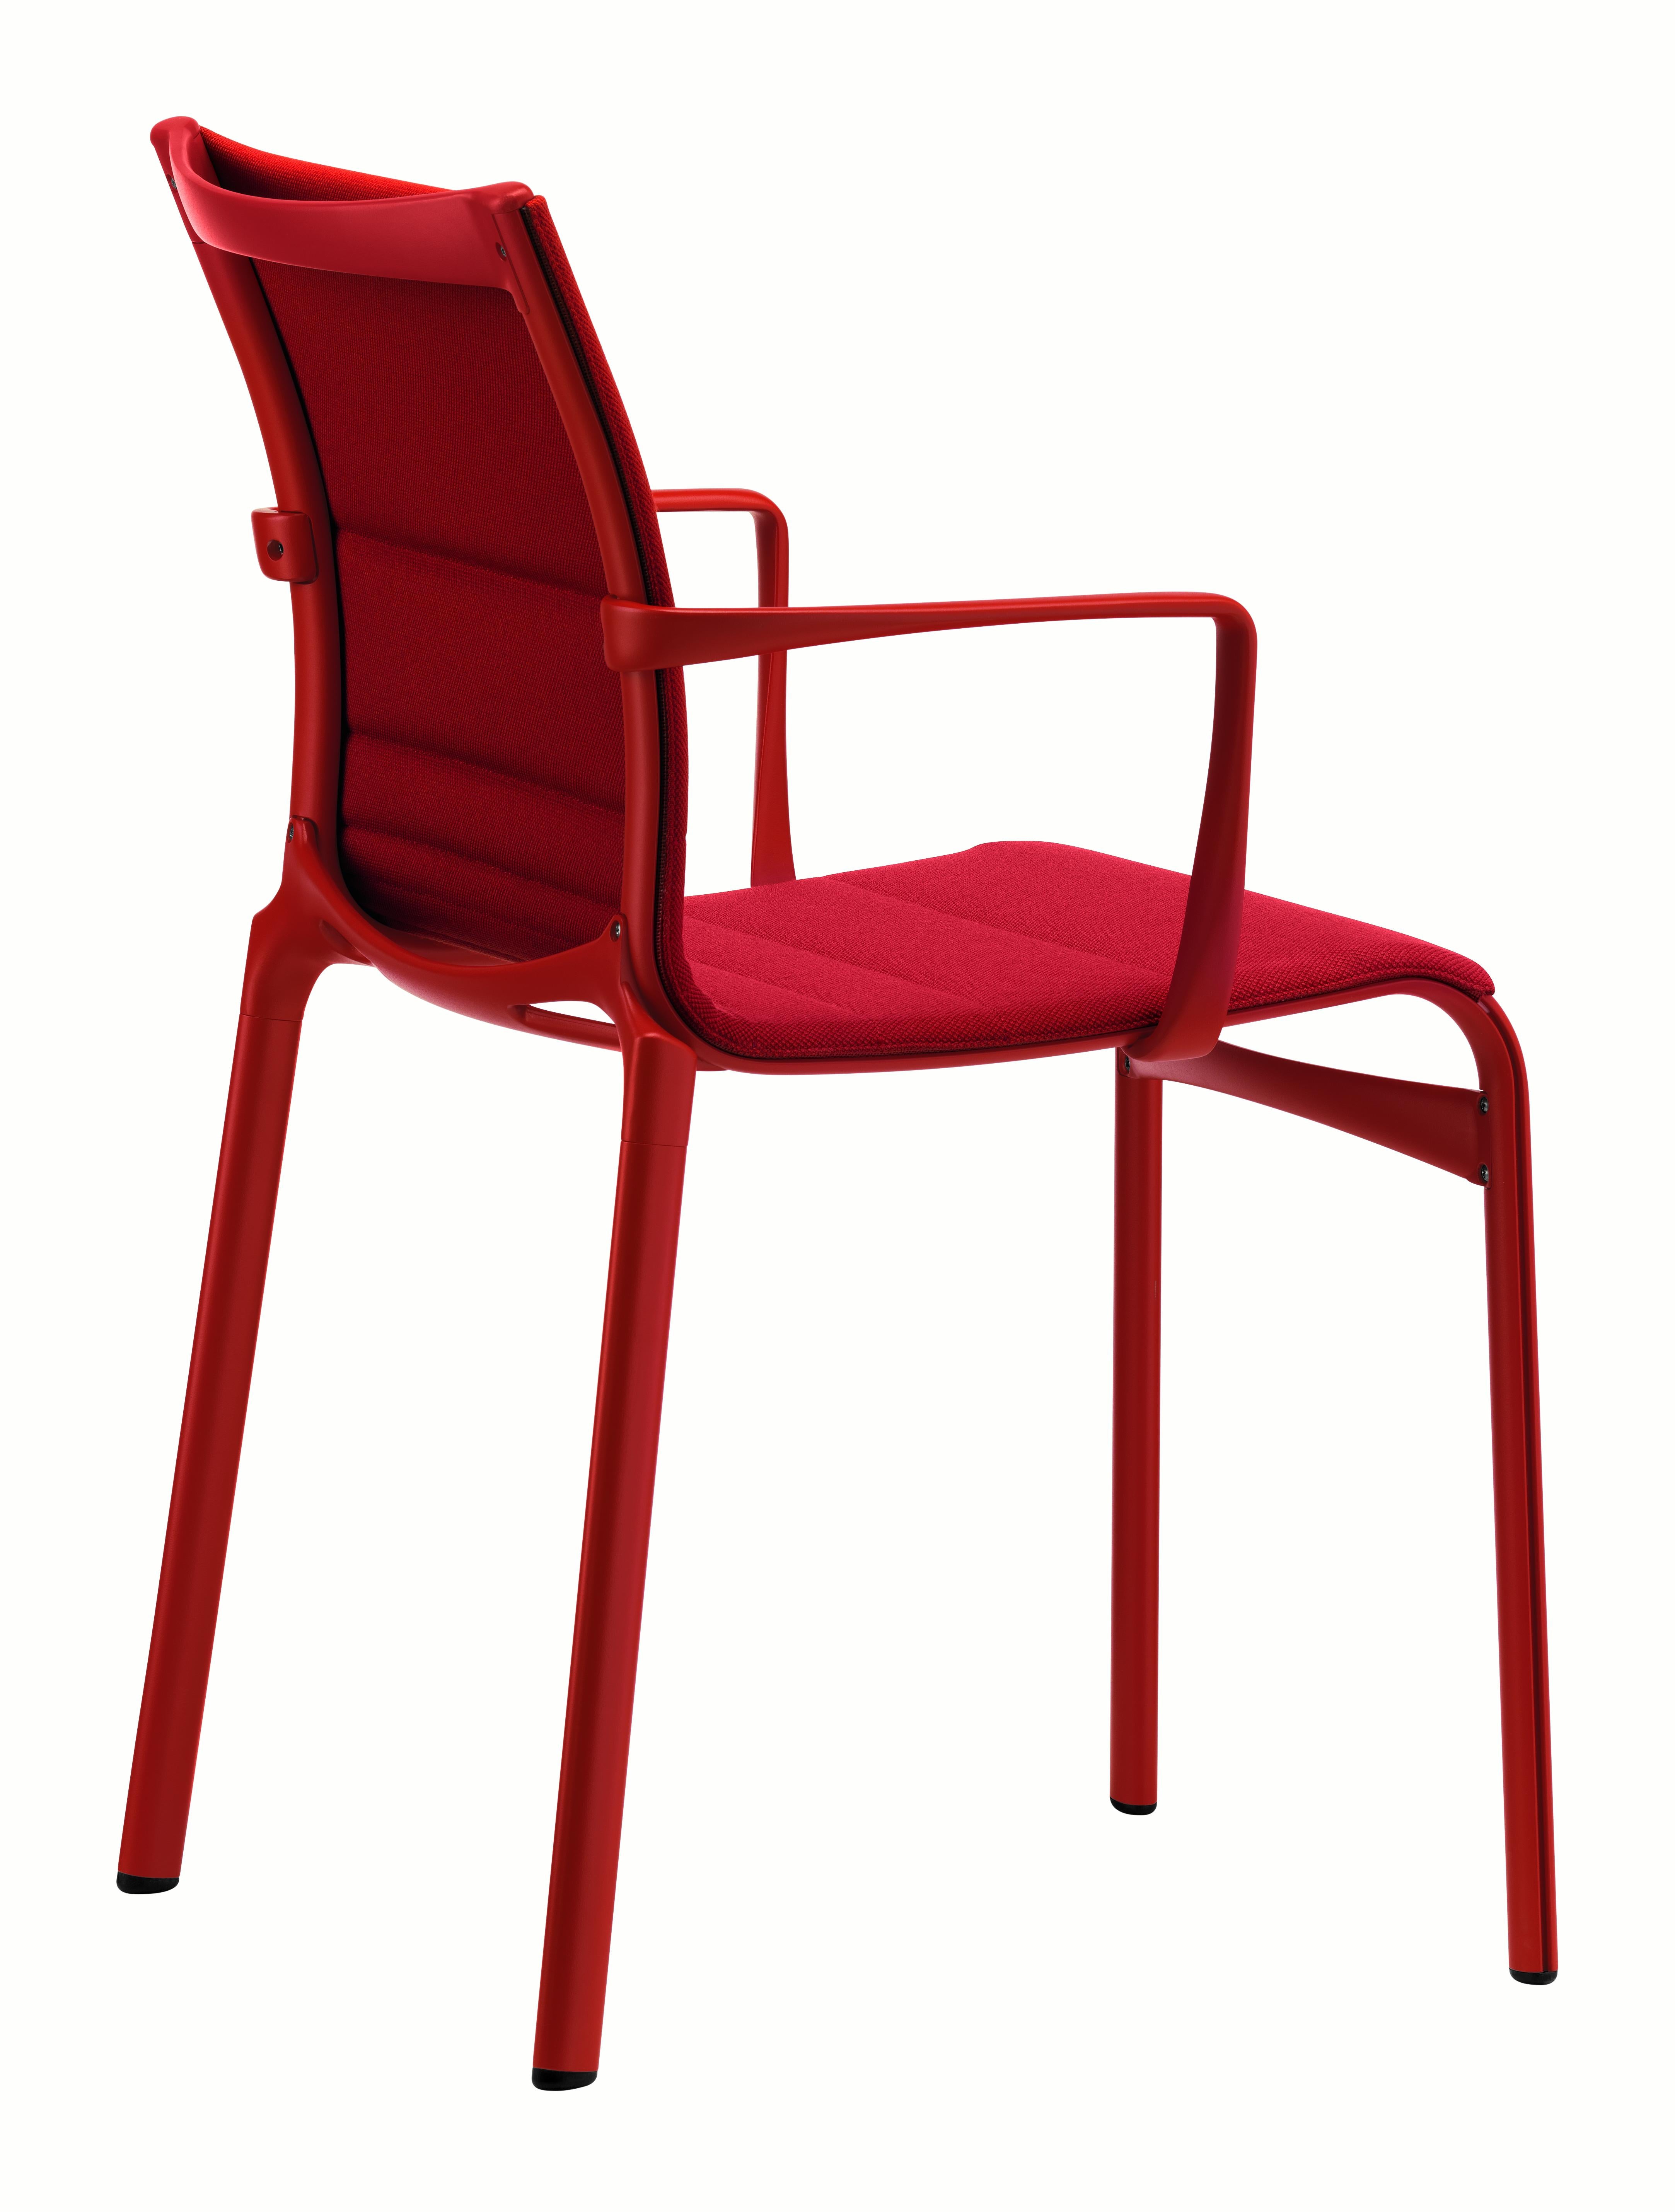 Alias Bigframe 44 Armchair in Red Upholstery with Lacquered Aluminium Frame by Alberto Meda

Stacking chair with arms, structure composed of extruded aluminium profile and die-cast aluminium elements. Seat and back in fire retardant PVC covered